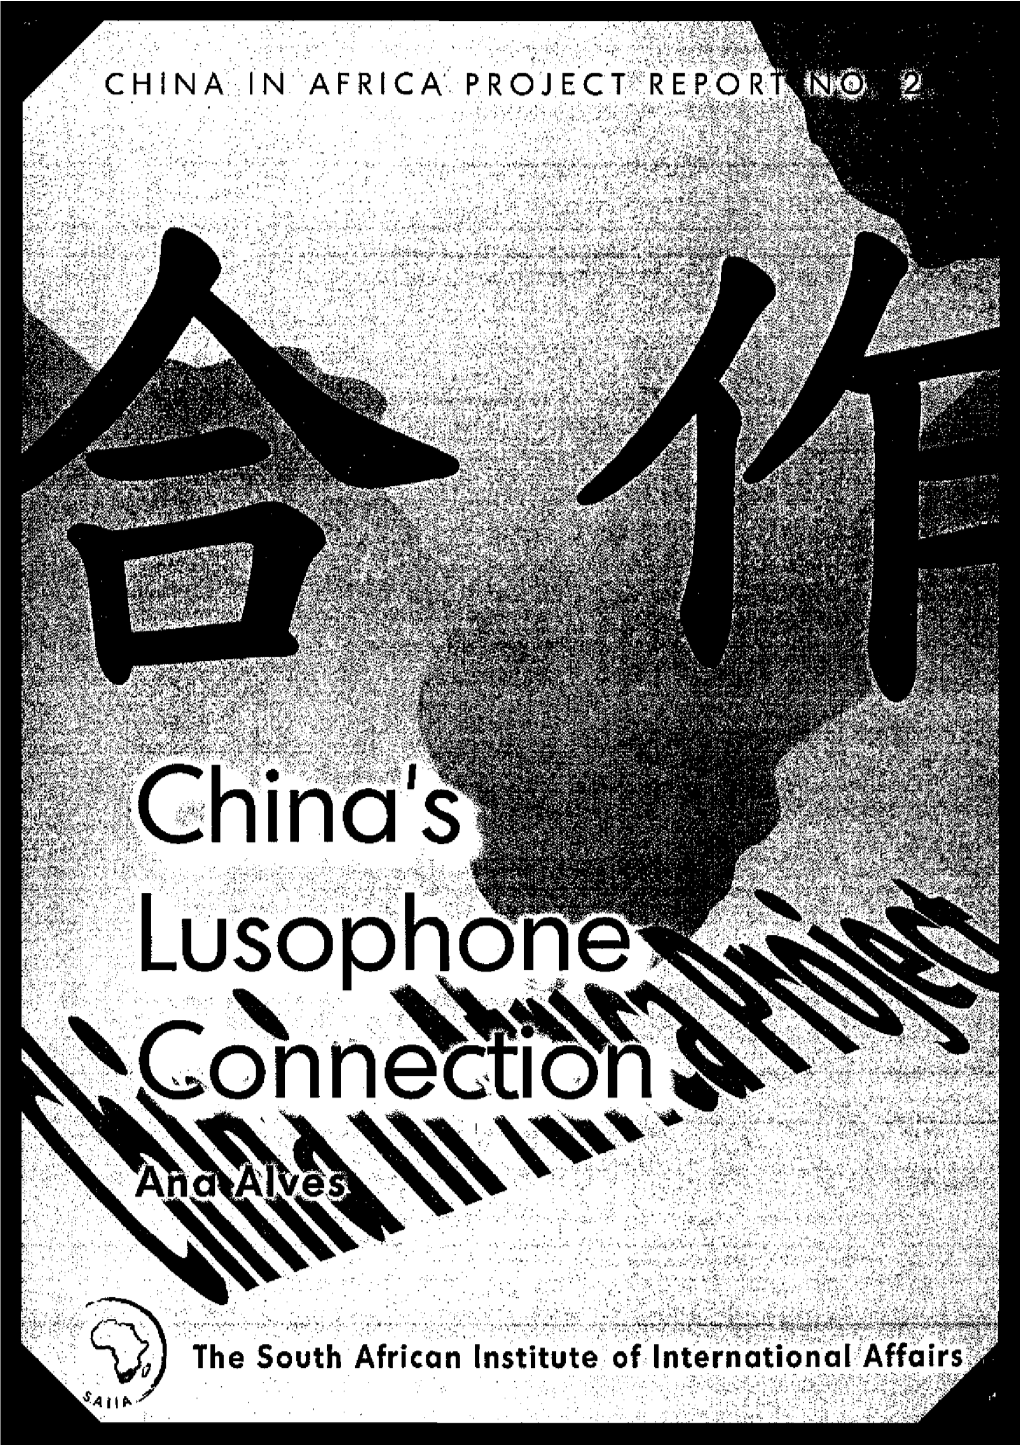 China's Lusophone Connection